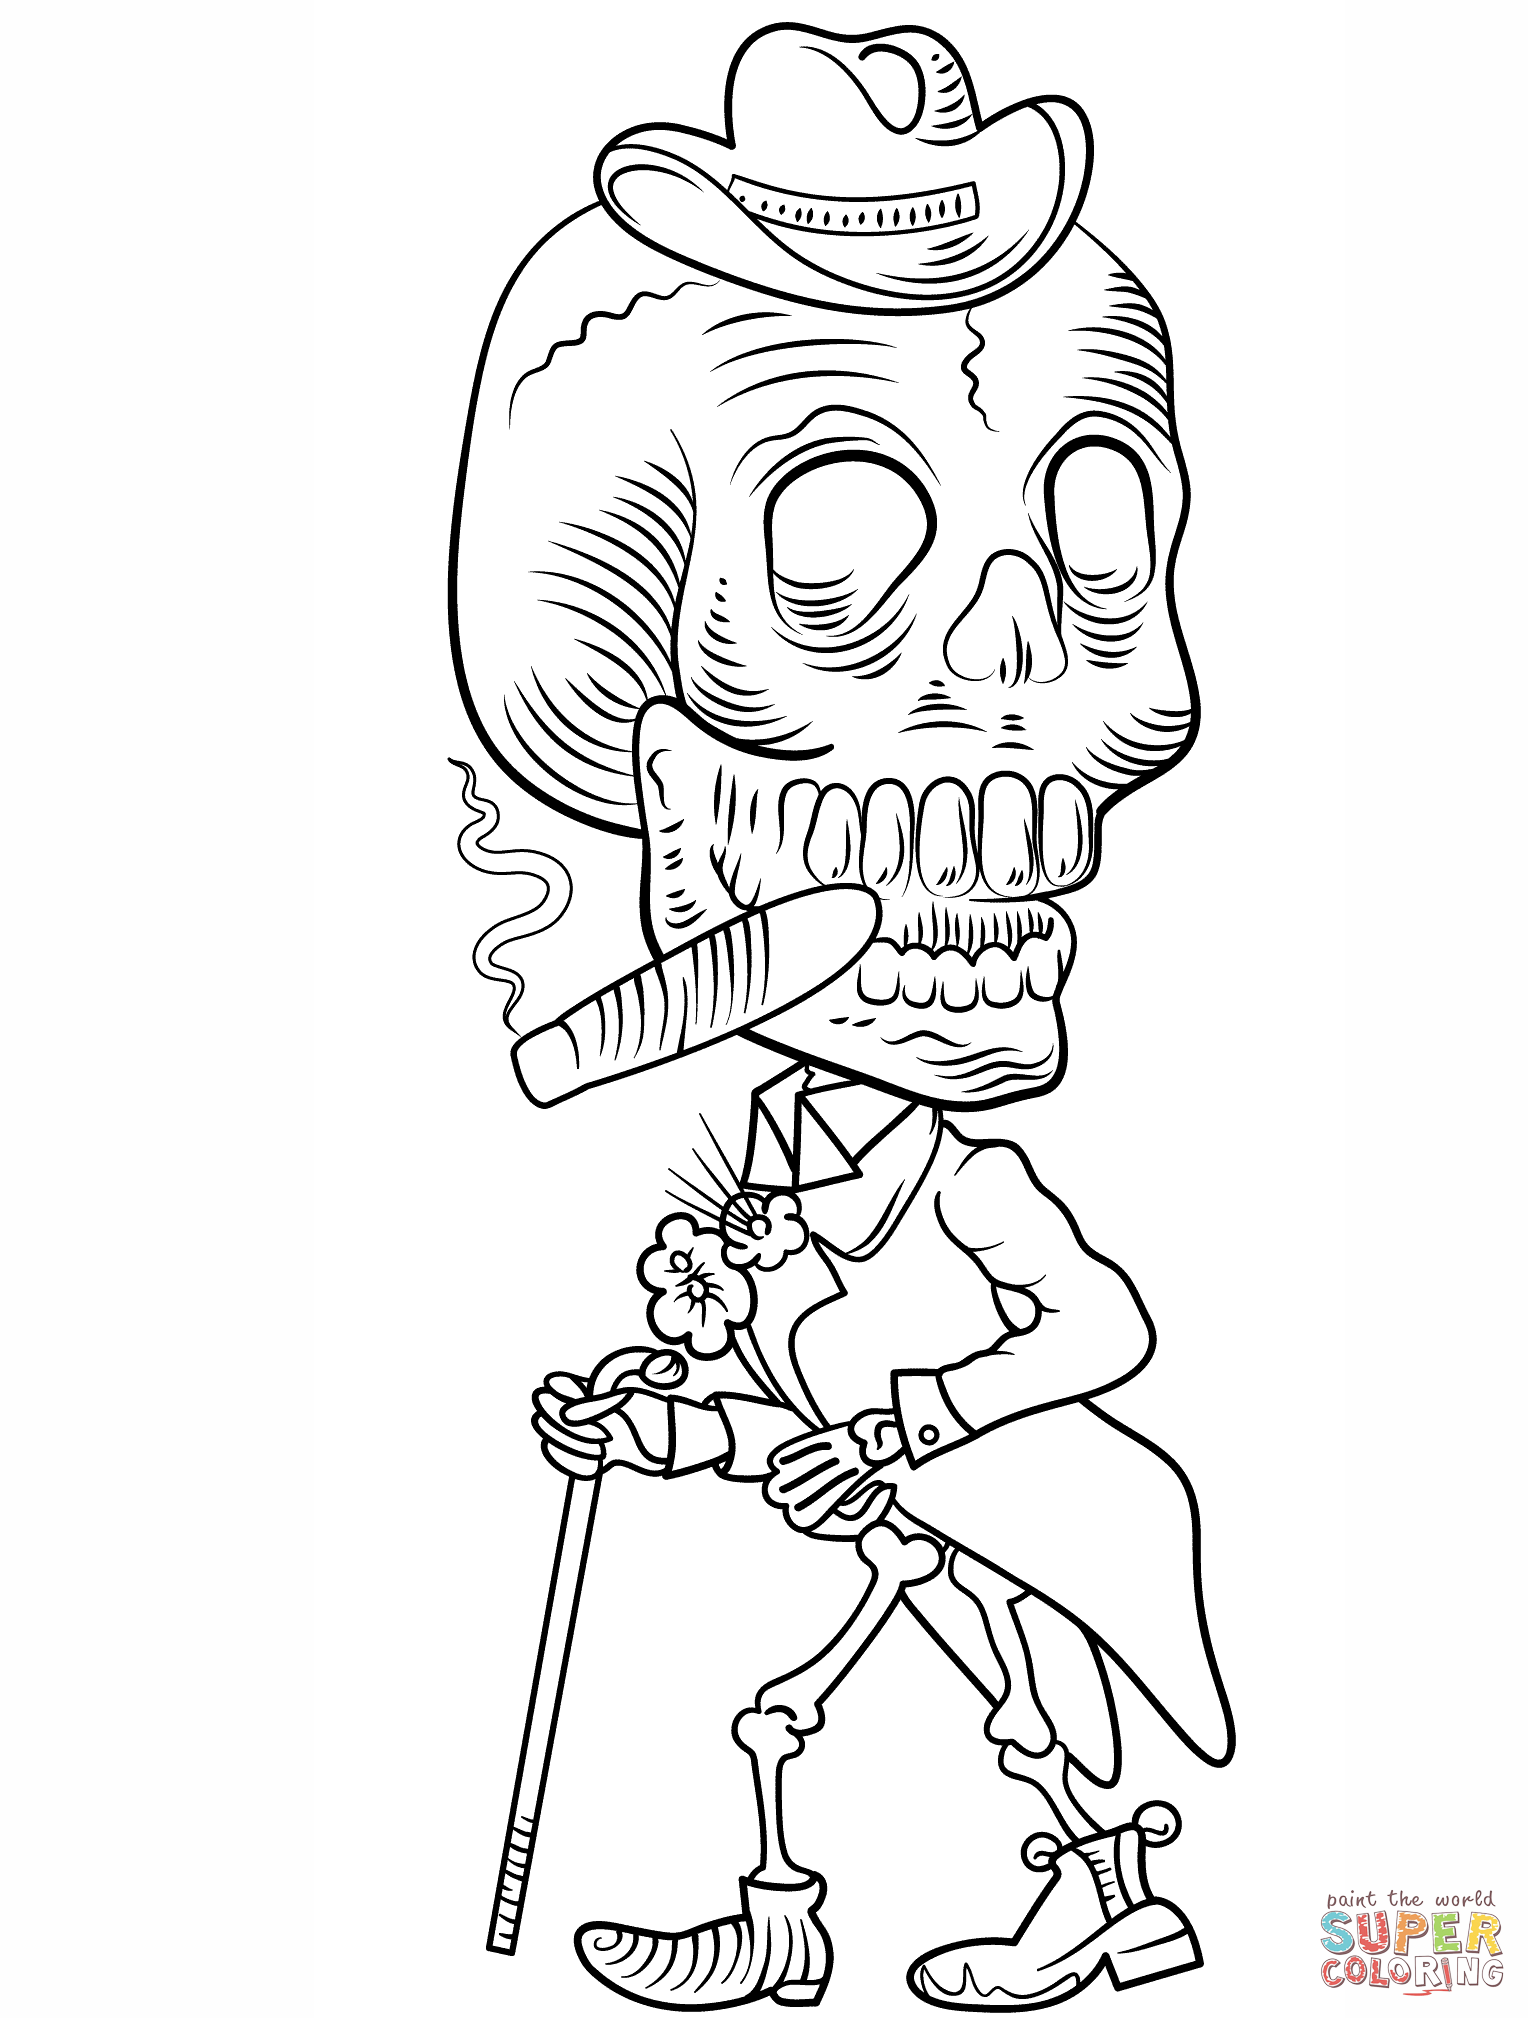 Day of the Dead Skeleton coloring page | Free Printable ...